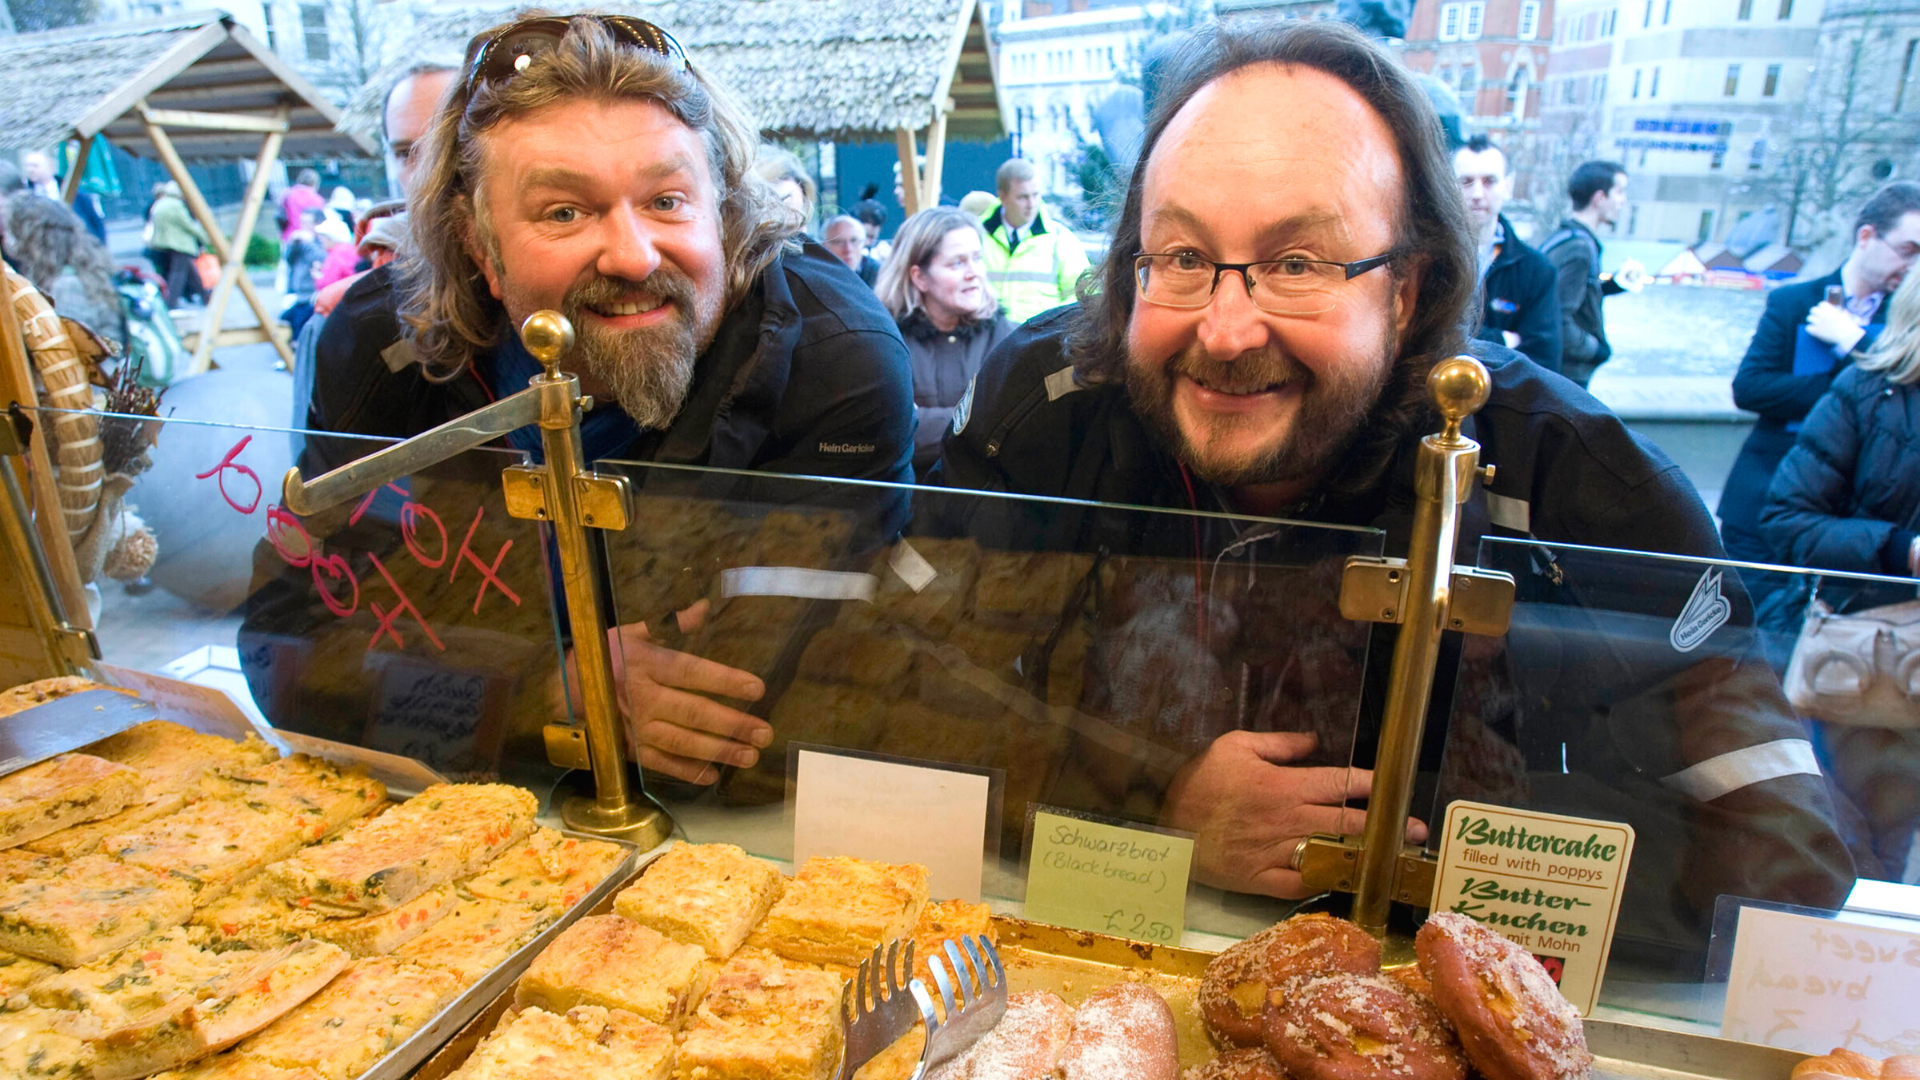 Si King with fellow Hairy Biker Dave Myers in Birmingham. Image credit: Birmingham City Council / Flickr